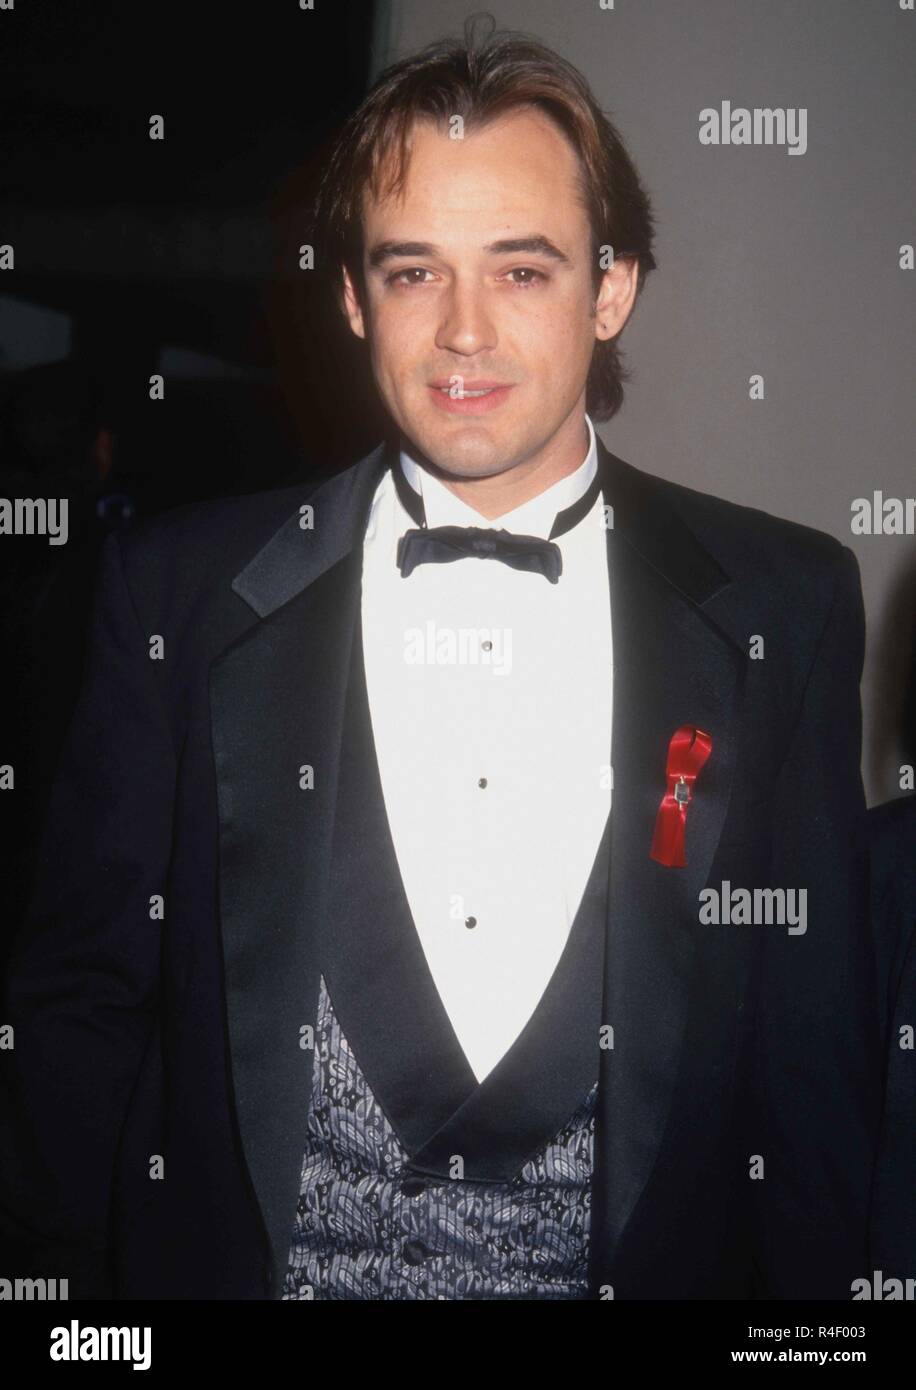 BEVERLY HILLS, CA - FEBRUARY 26: Actor Jon Lindstrom attends the Ninth Annual Soap Opera Digest Awards on February 26, 1993 at the Beverly Hilton Hotel in Beverly Hills, California. Photo by Barry King/Alamy Stock Photo Stock Photo